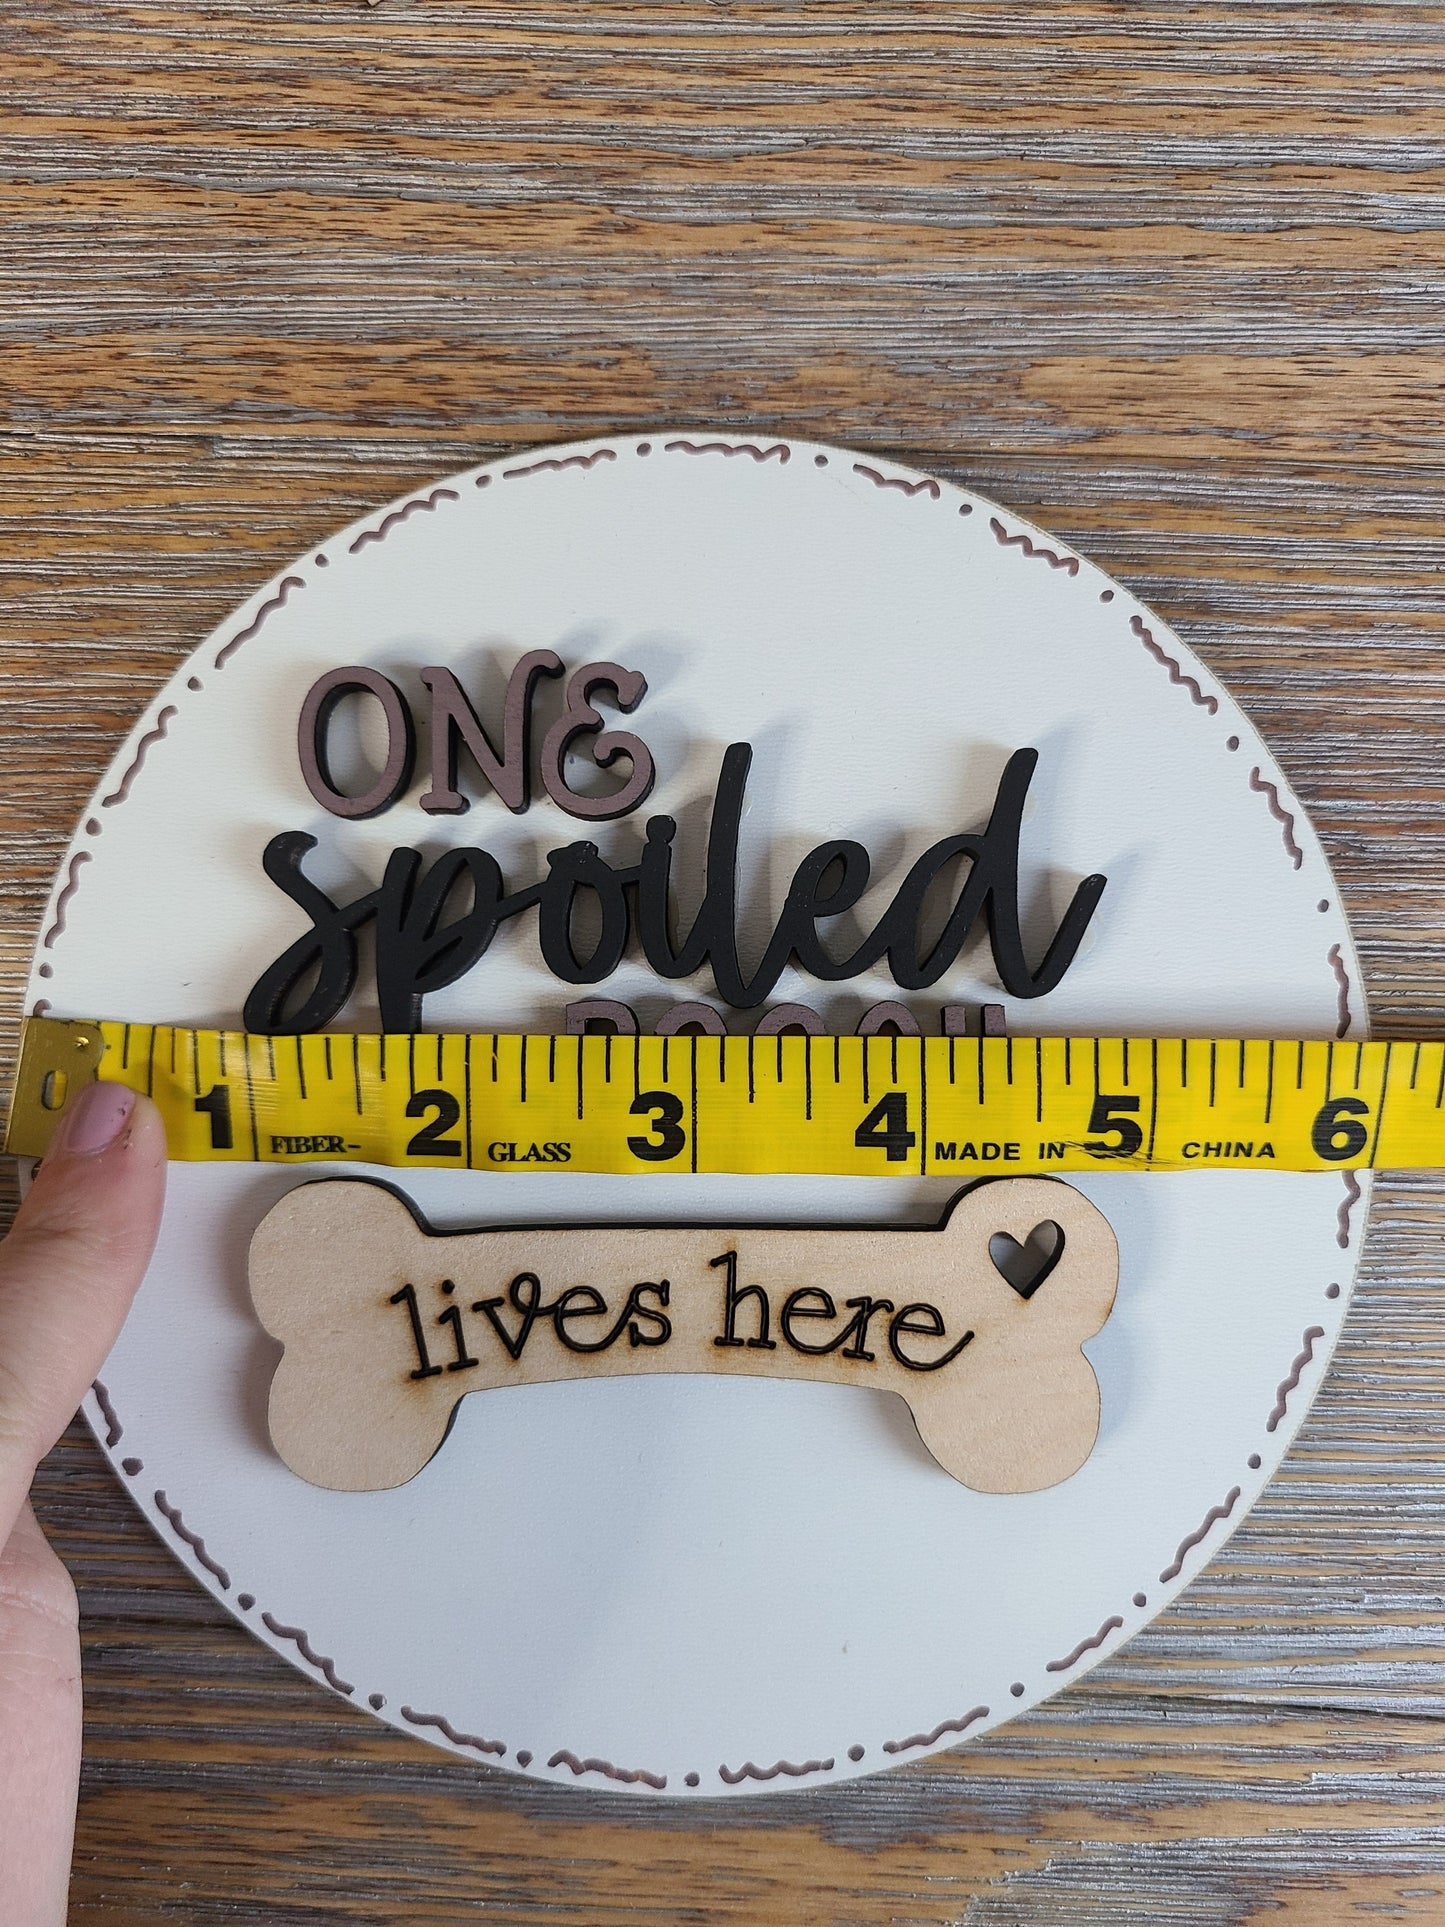 One Spoiled Pooch Sign with or without Interchangeable Tabletop Sign Holder